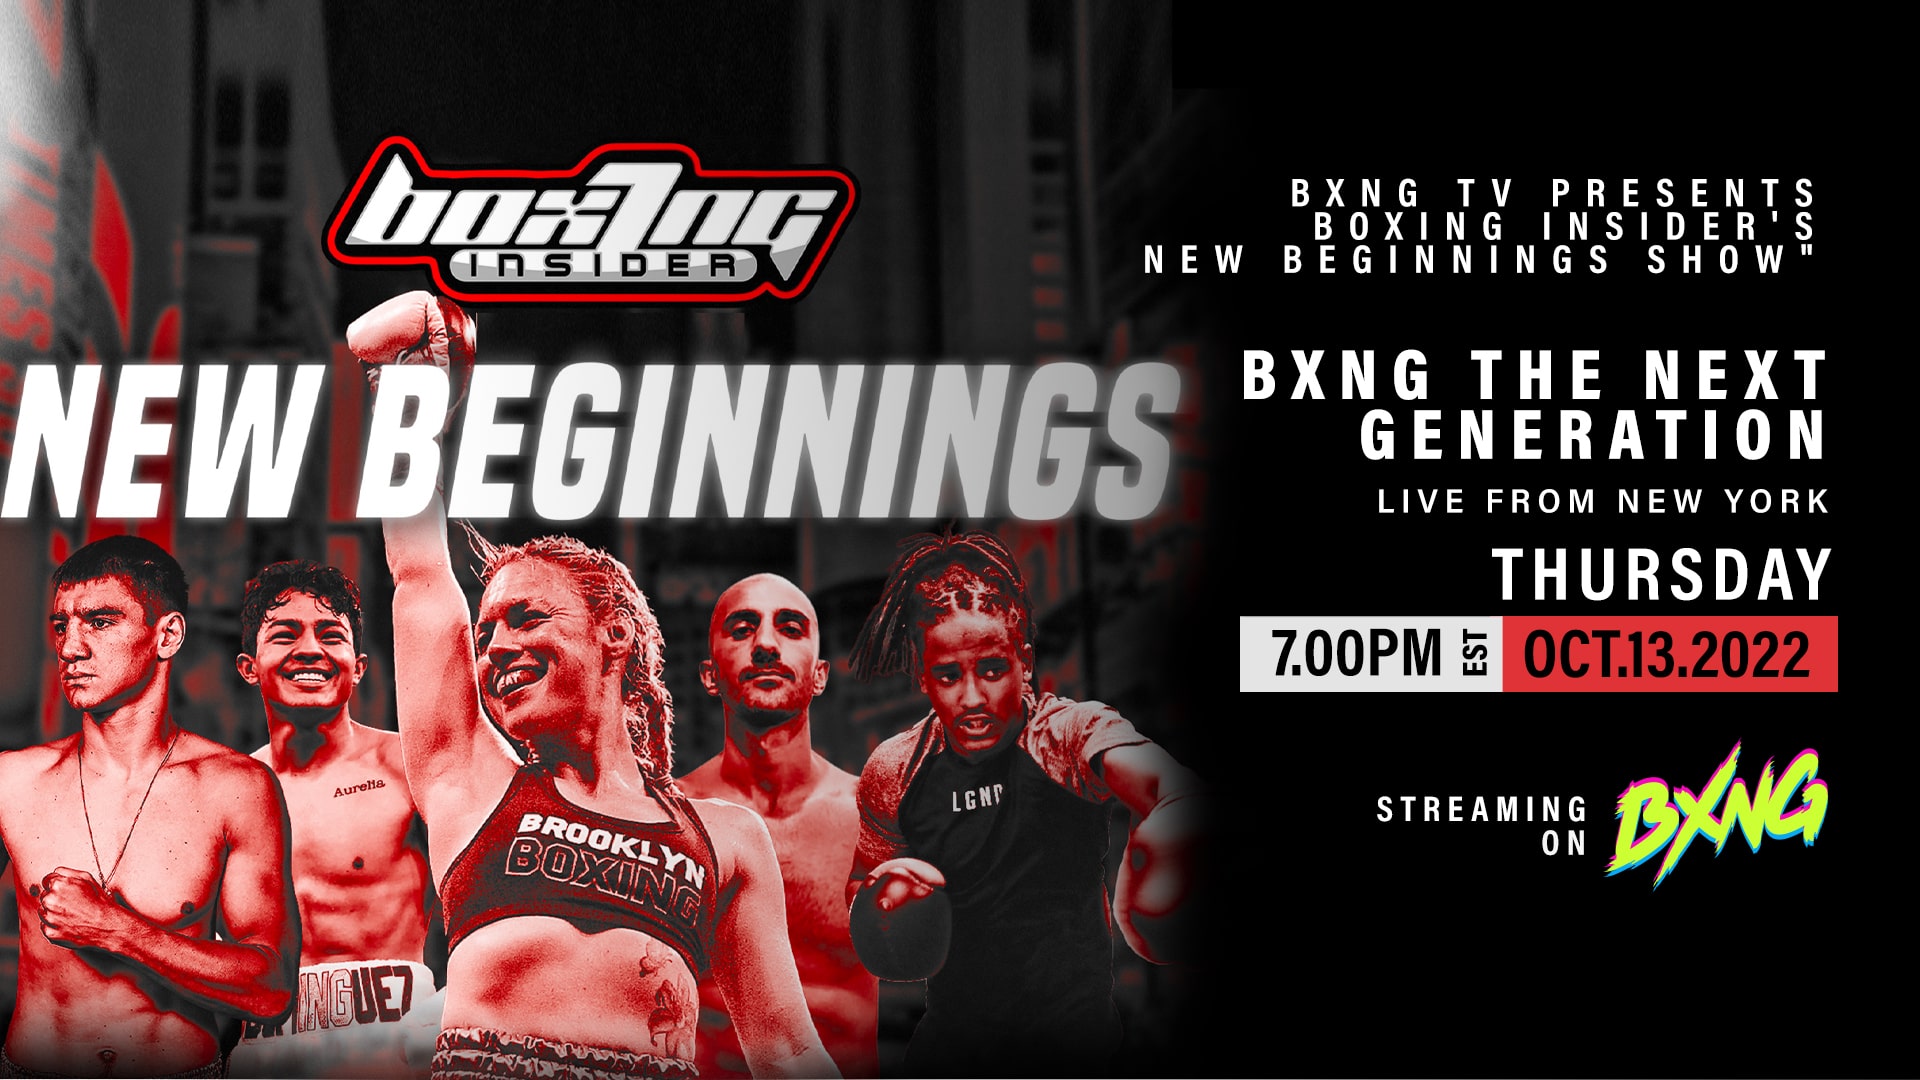 BXNG TV Presents Boxing Insiders